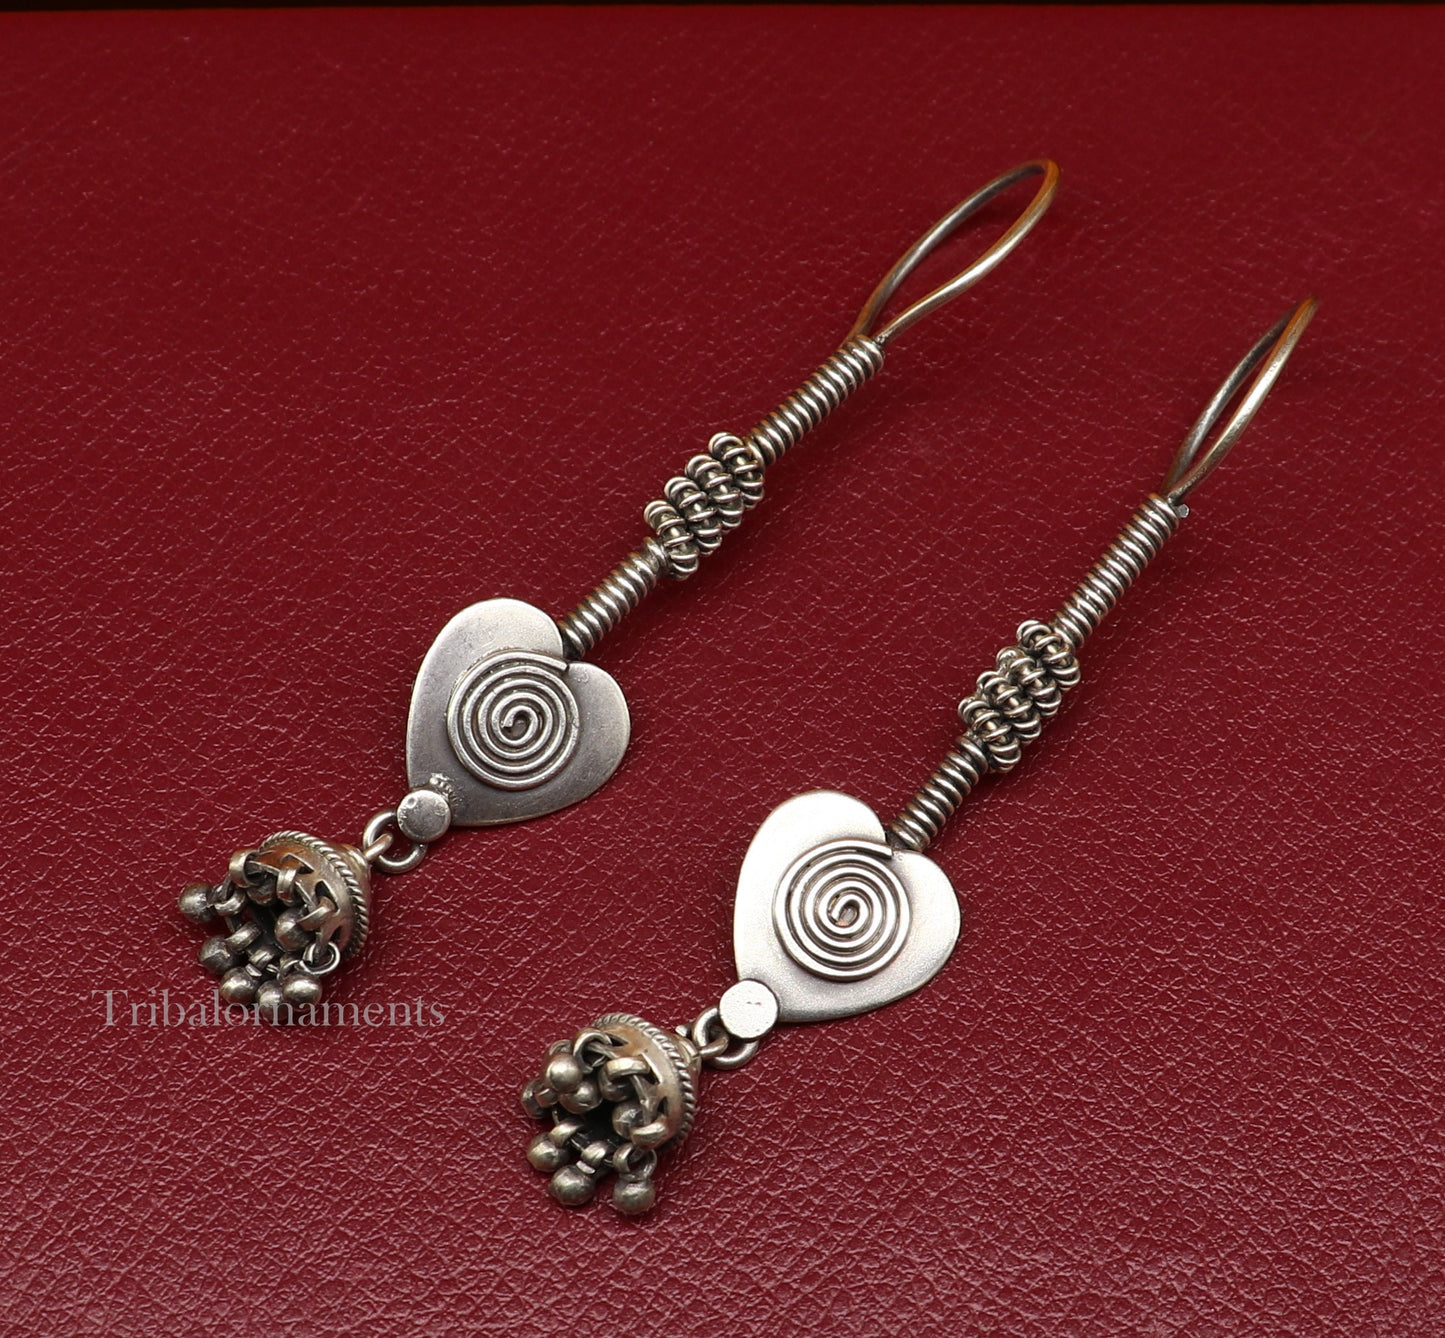 92.5 Sterling silver handmade charm hoops earring jhumka, excellent customized best gift for brides girls ethnic tribal jewelry ear980 - TRIBAL ORNAMENTS